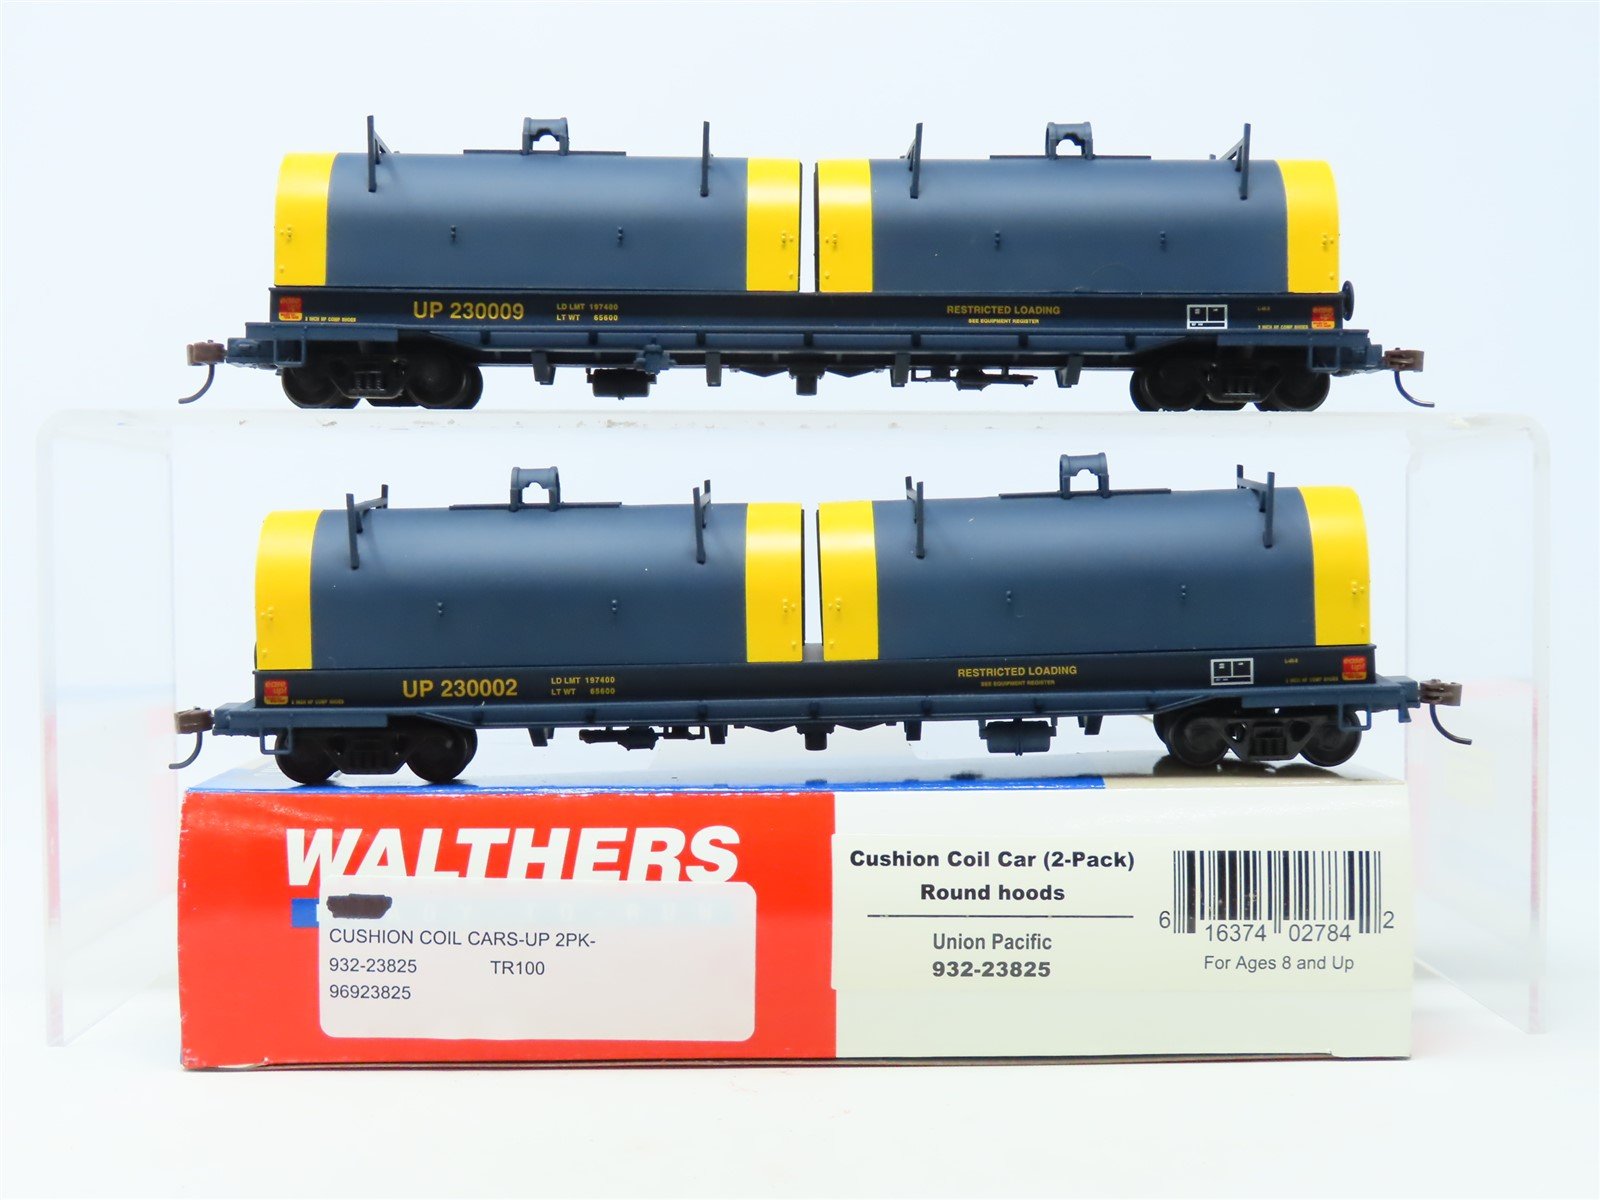 HO Walthers #932-23825 UP Union Pacific Cushion Coil Cars w/ Round Hoods 2-Pack